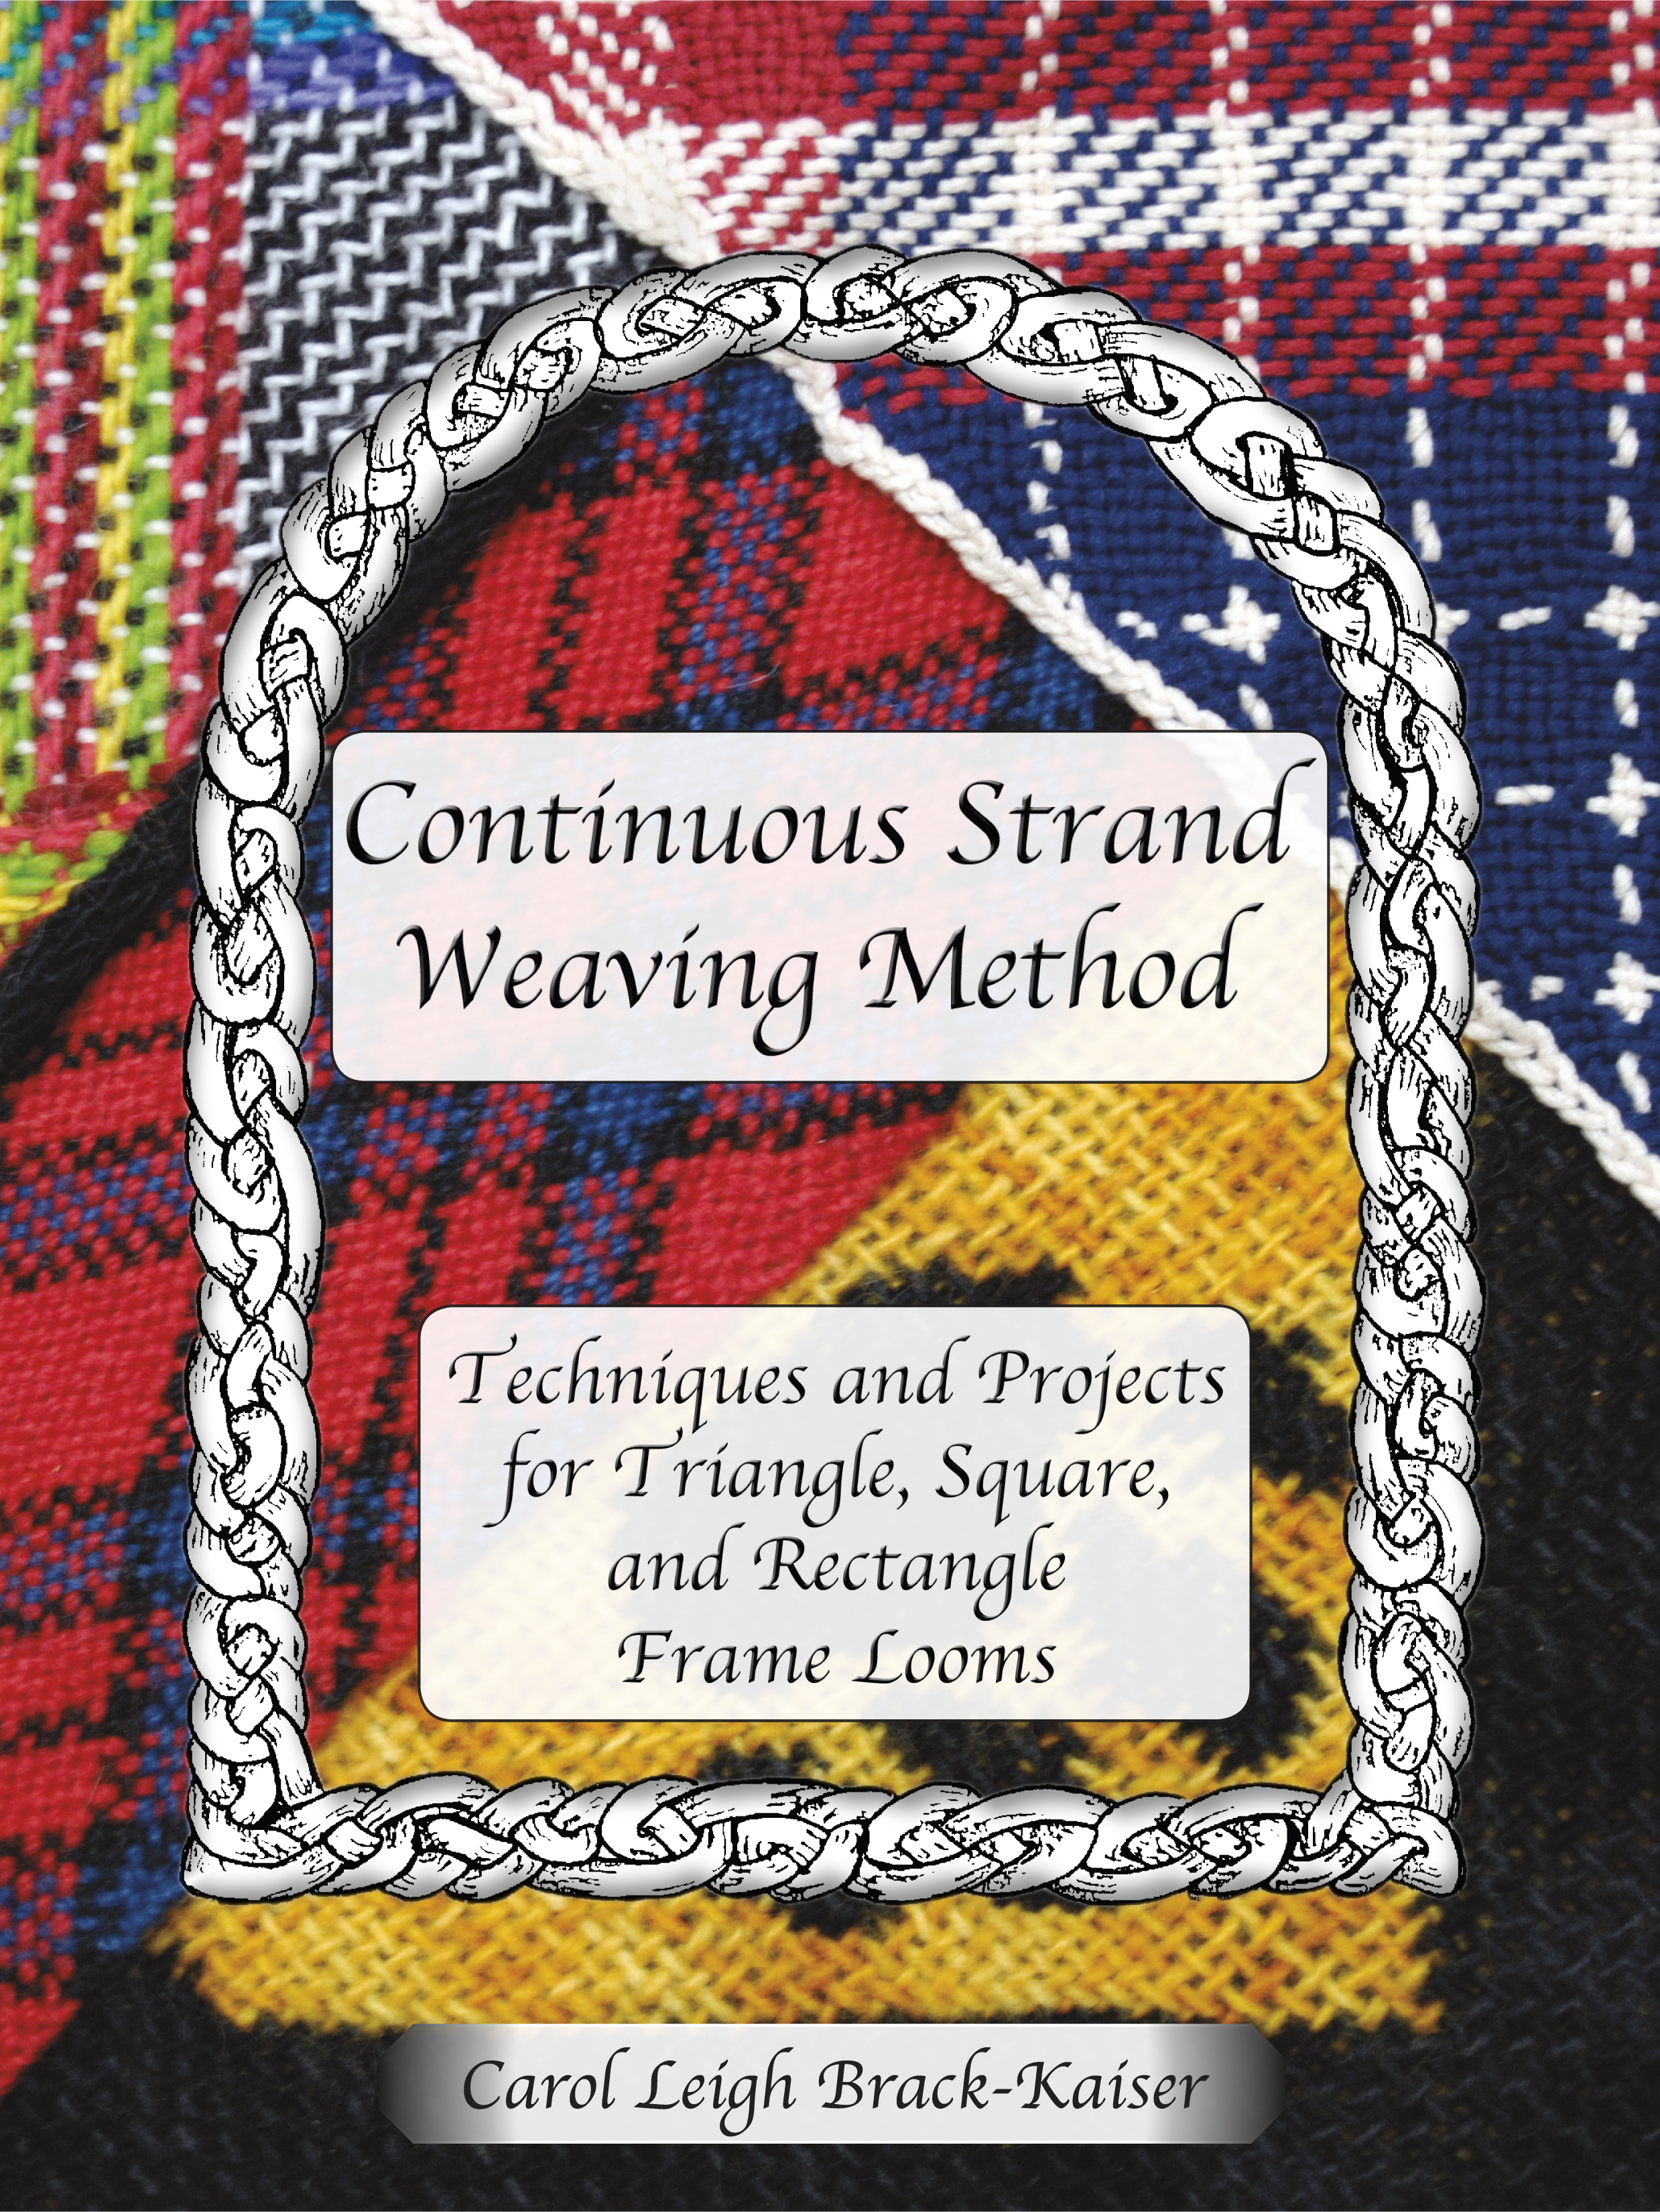 Continuous Strand Weaving Method, Techniques and Projects for Triangle, Square, and Rectangle FrameÃÂ Looms